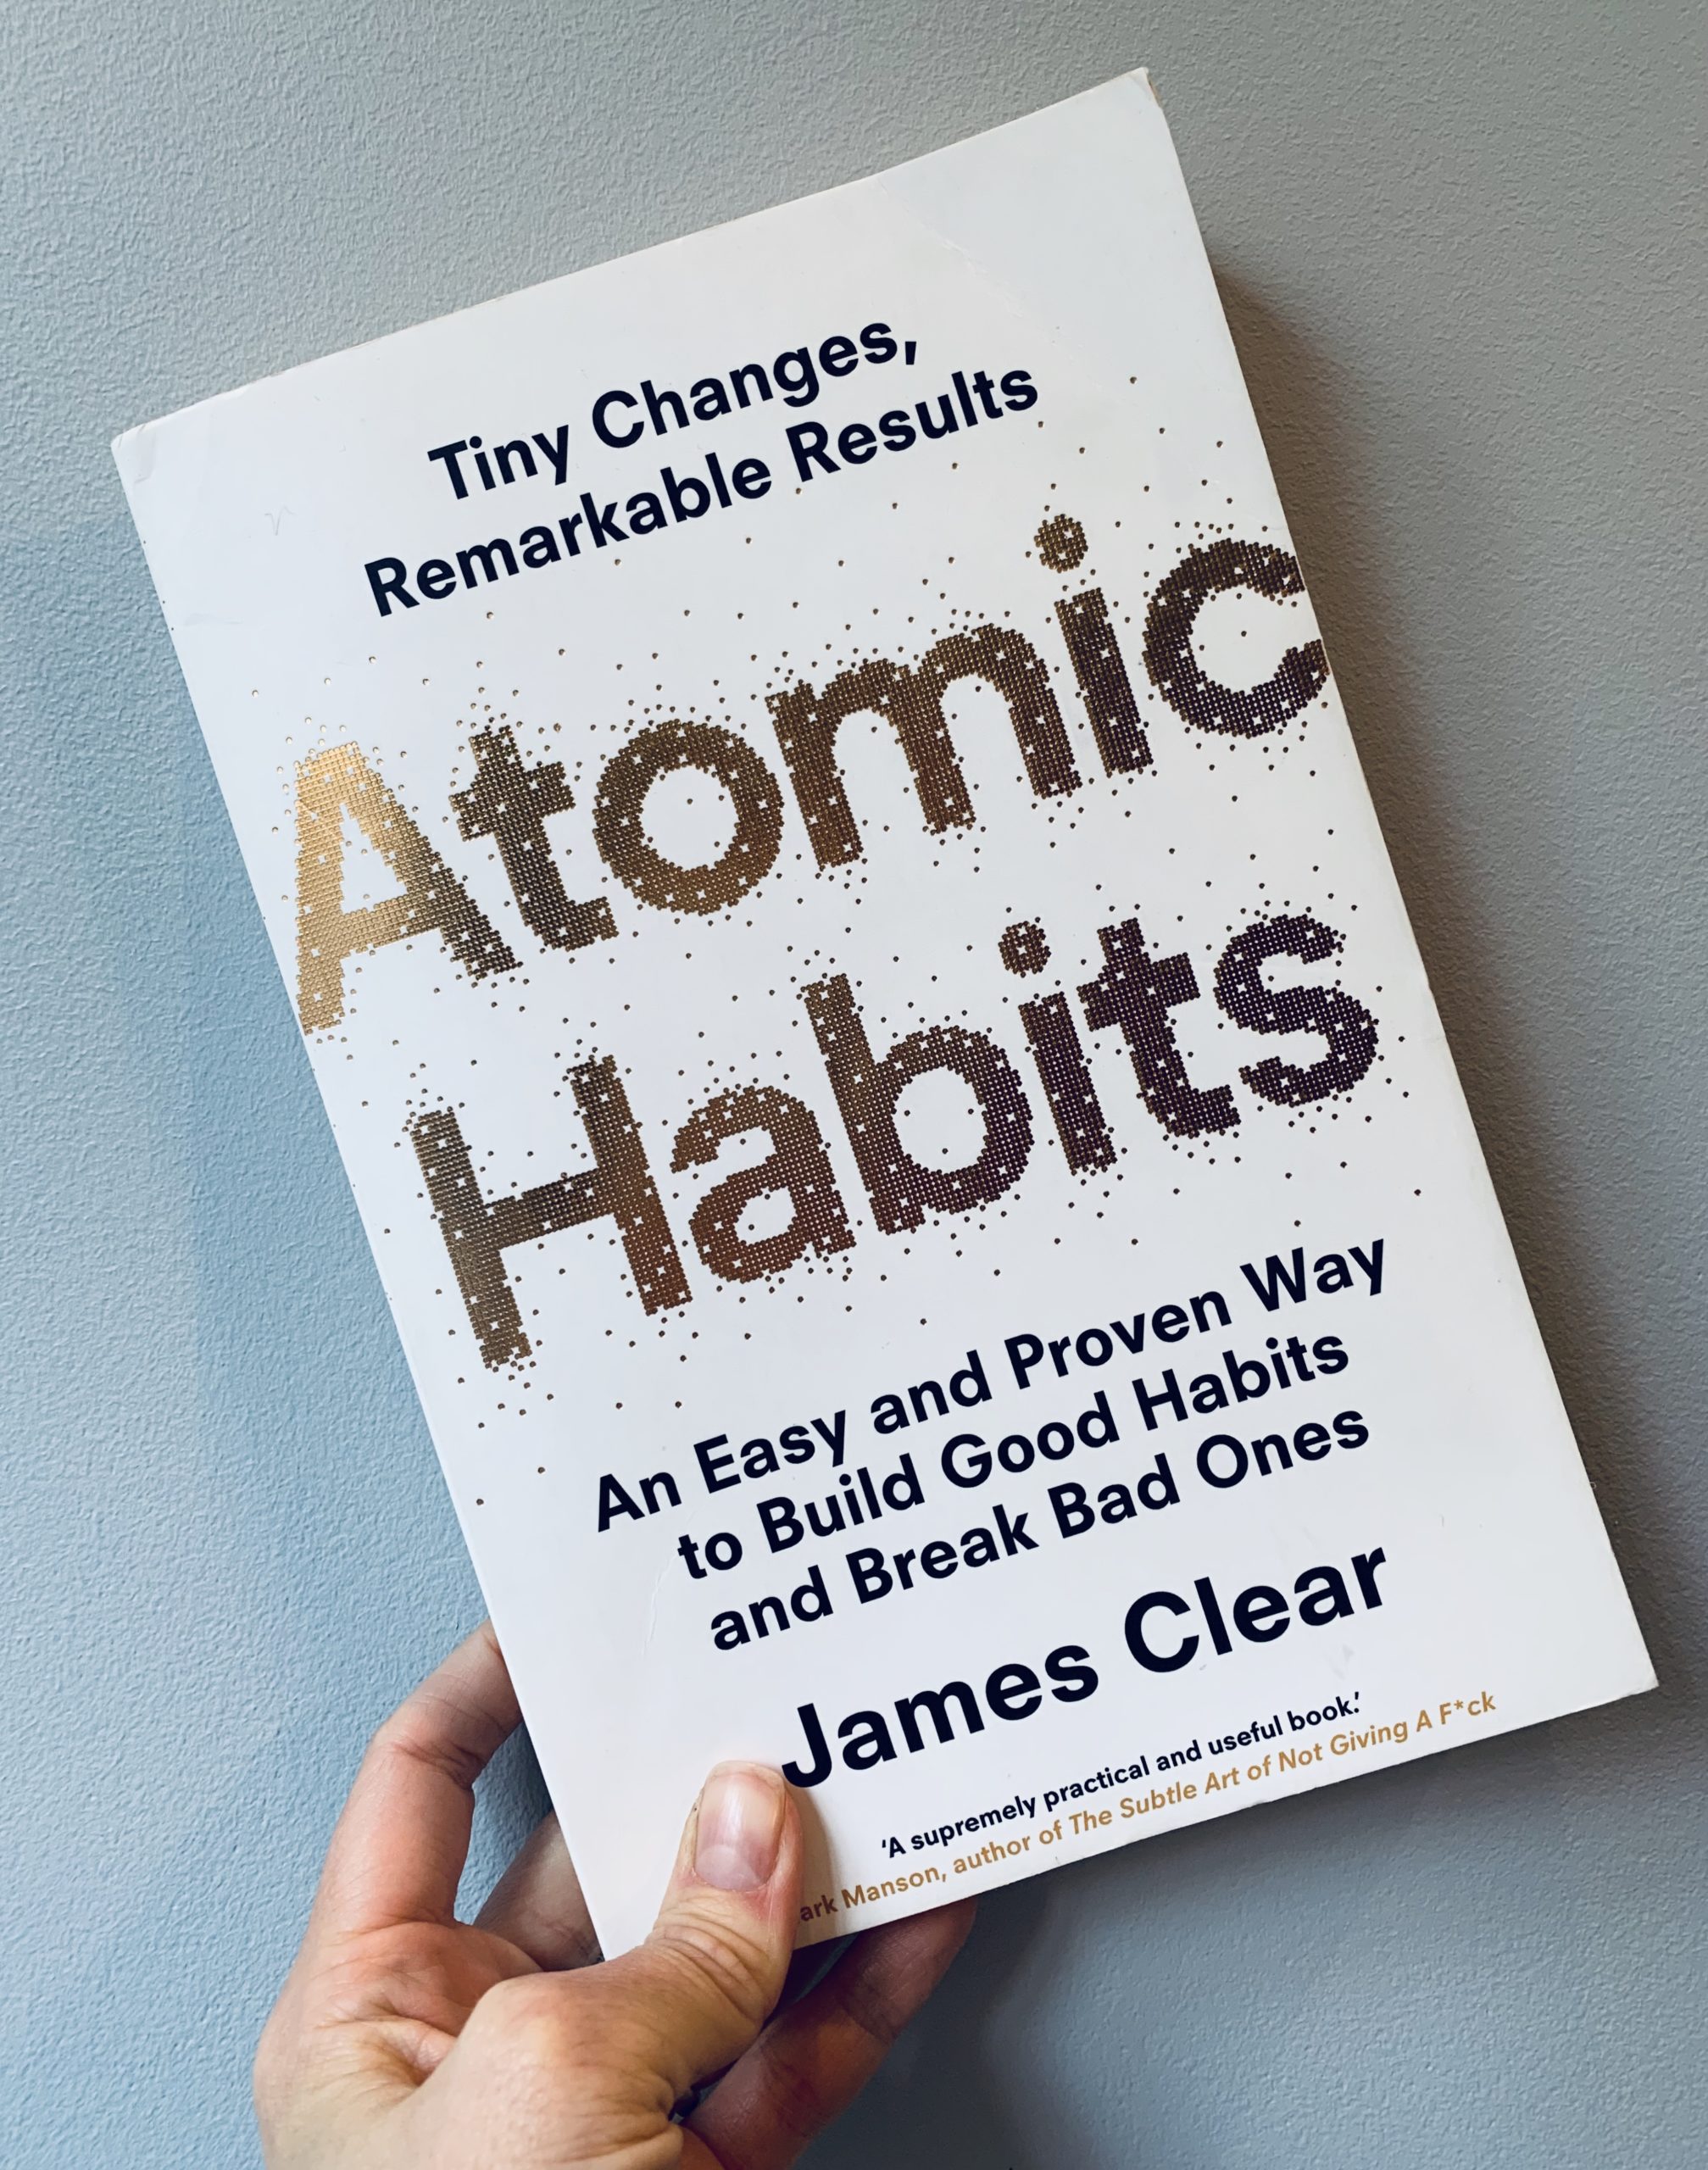 instal the last version for apple Atomic Habits